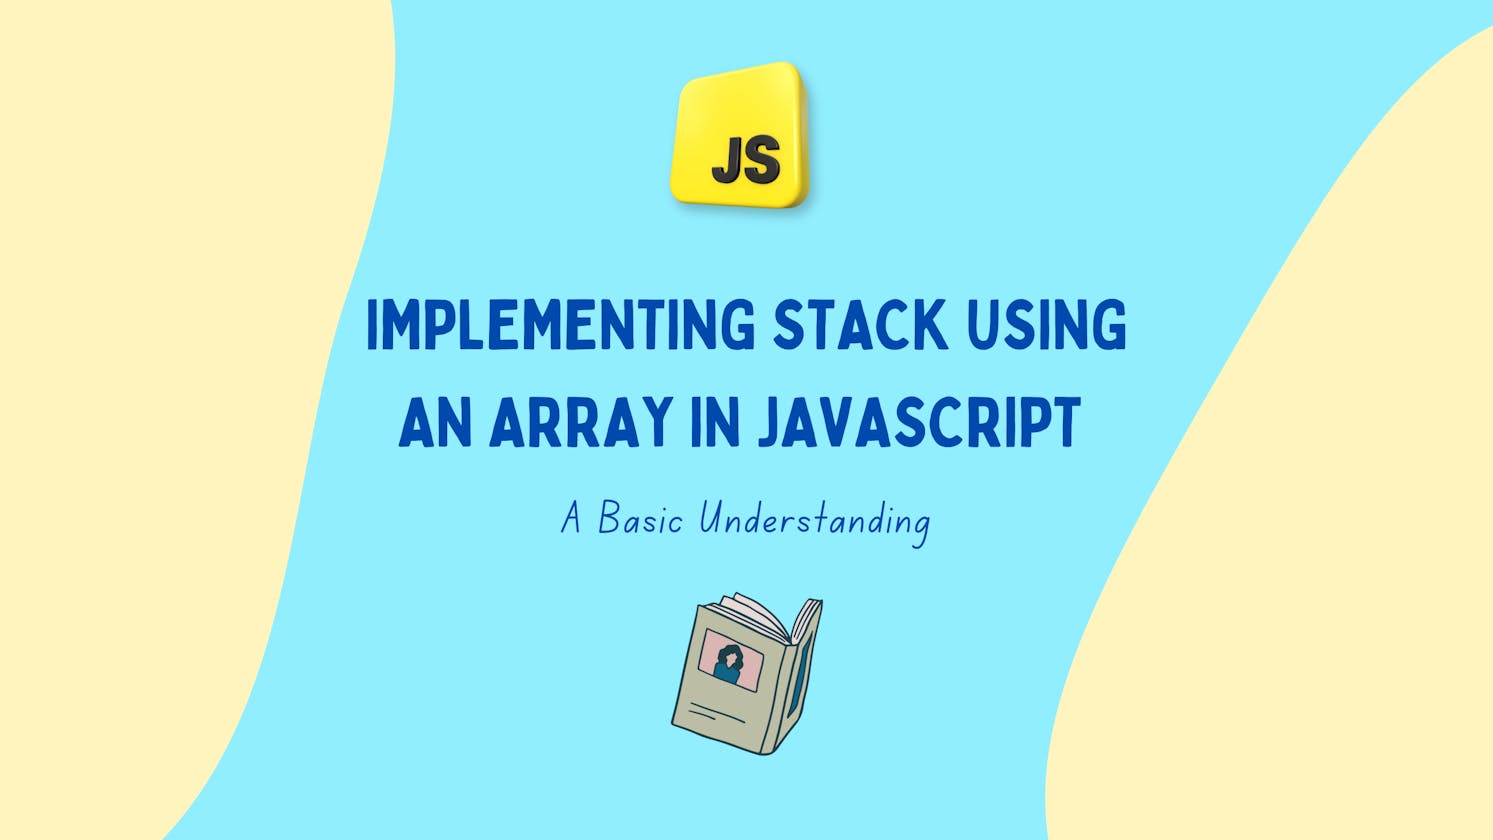 Implementing Stack Using an Array in JavaScript